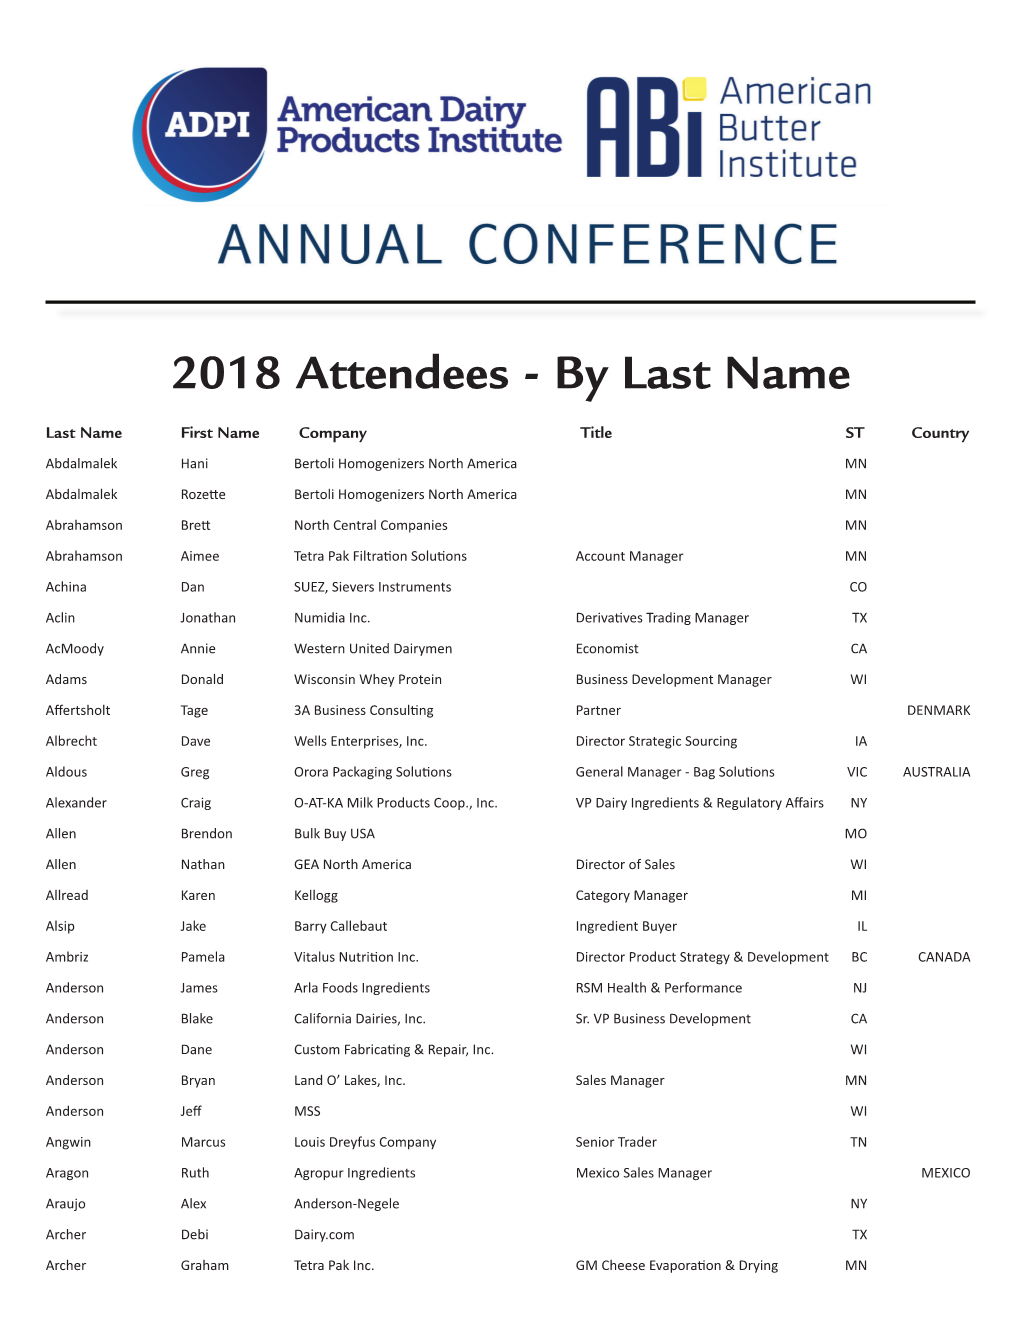 2018 Attendees - by Last Name